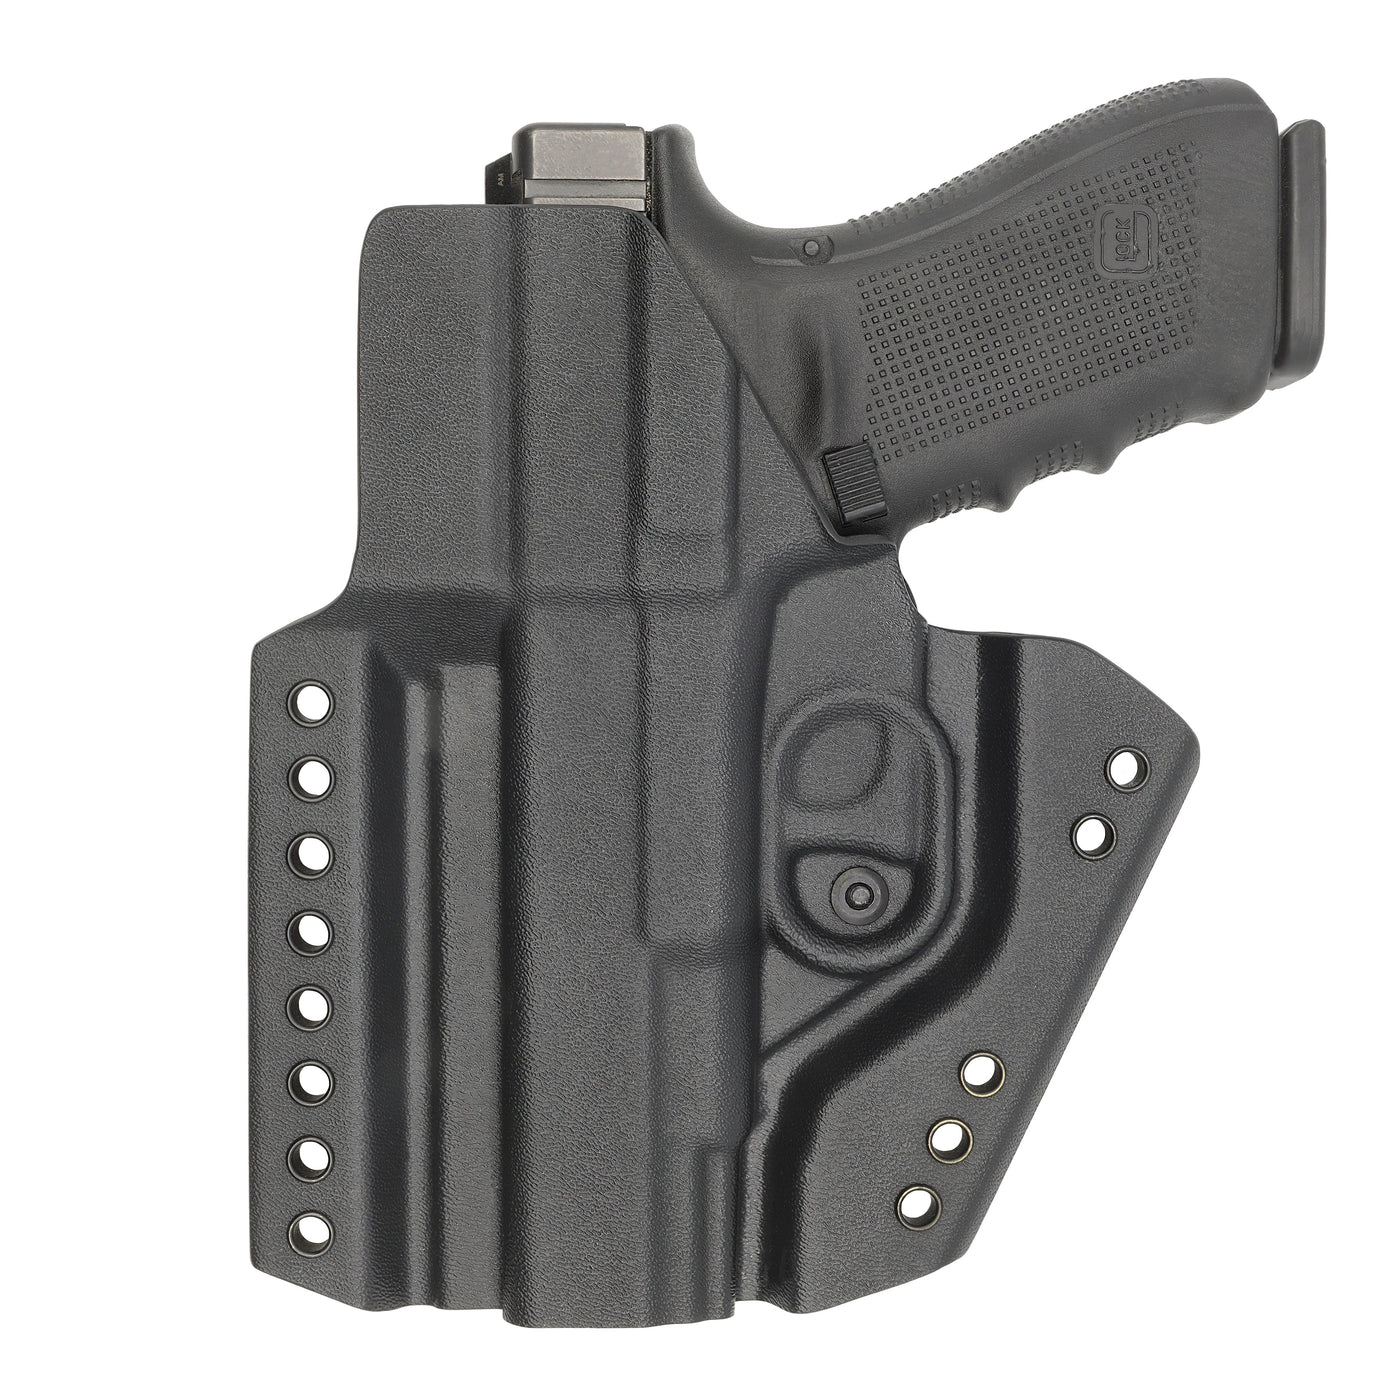 C&G Holsters quickship chest mounted system Glock 17/19 holstered back view